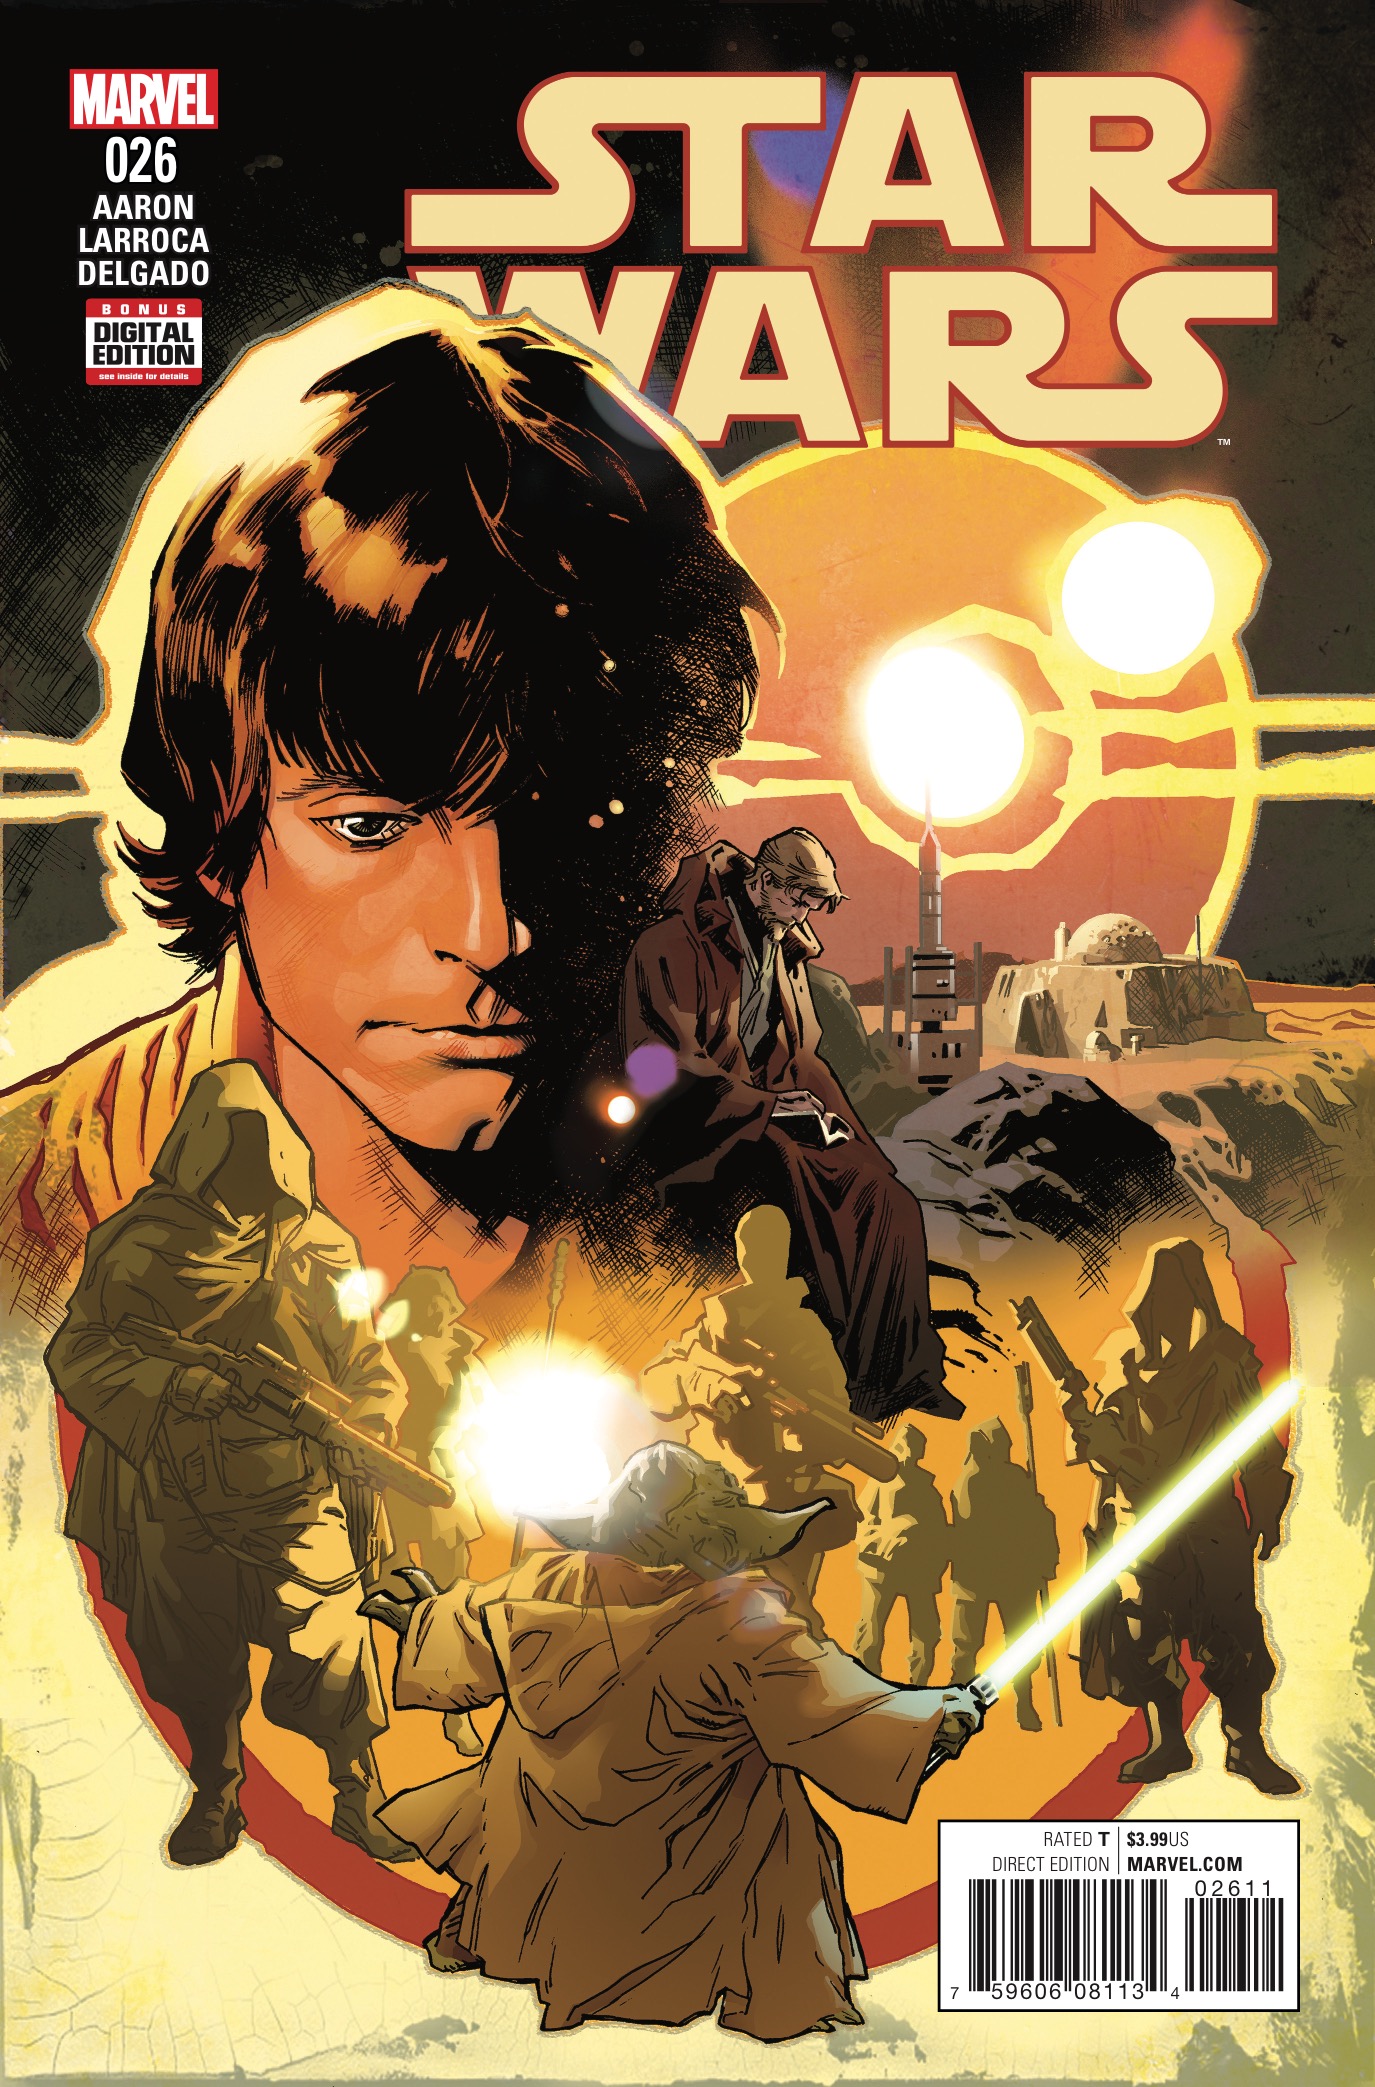 Star Wars #26 Review